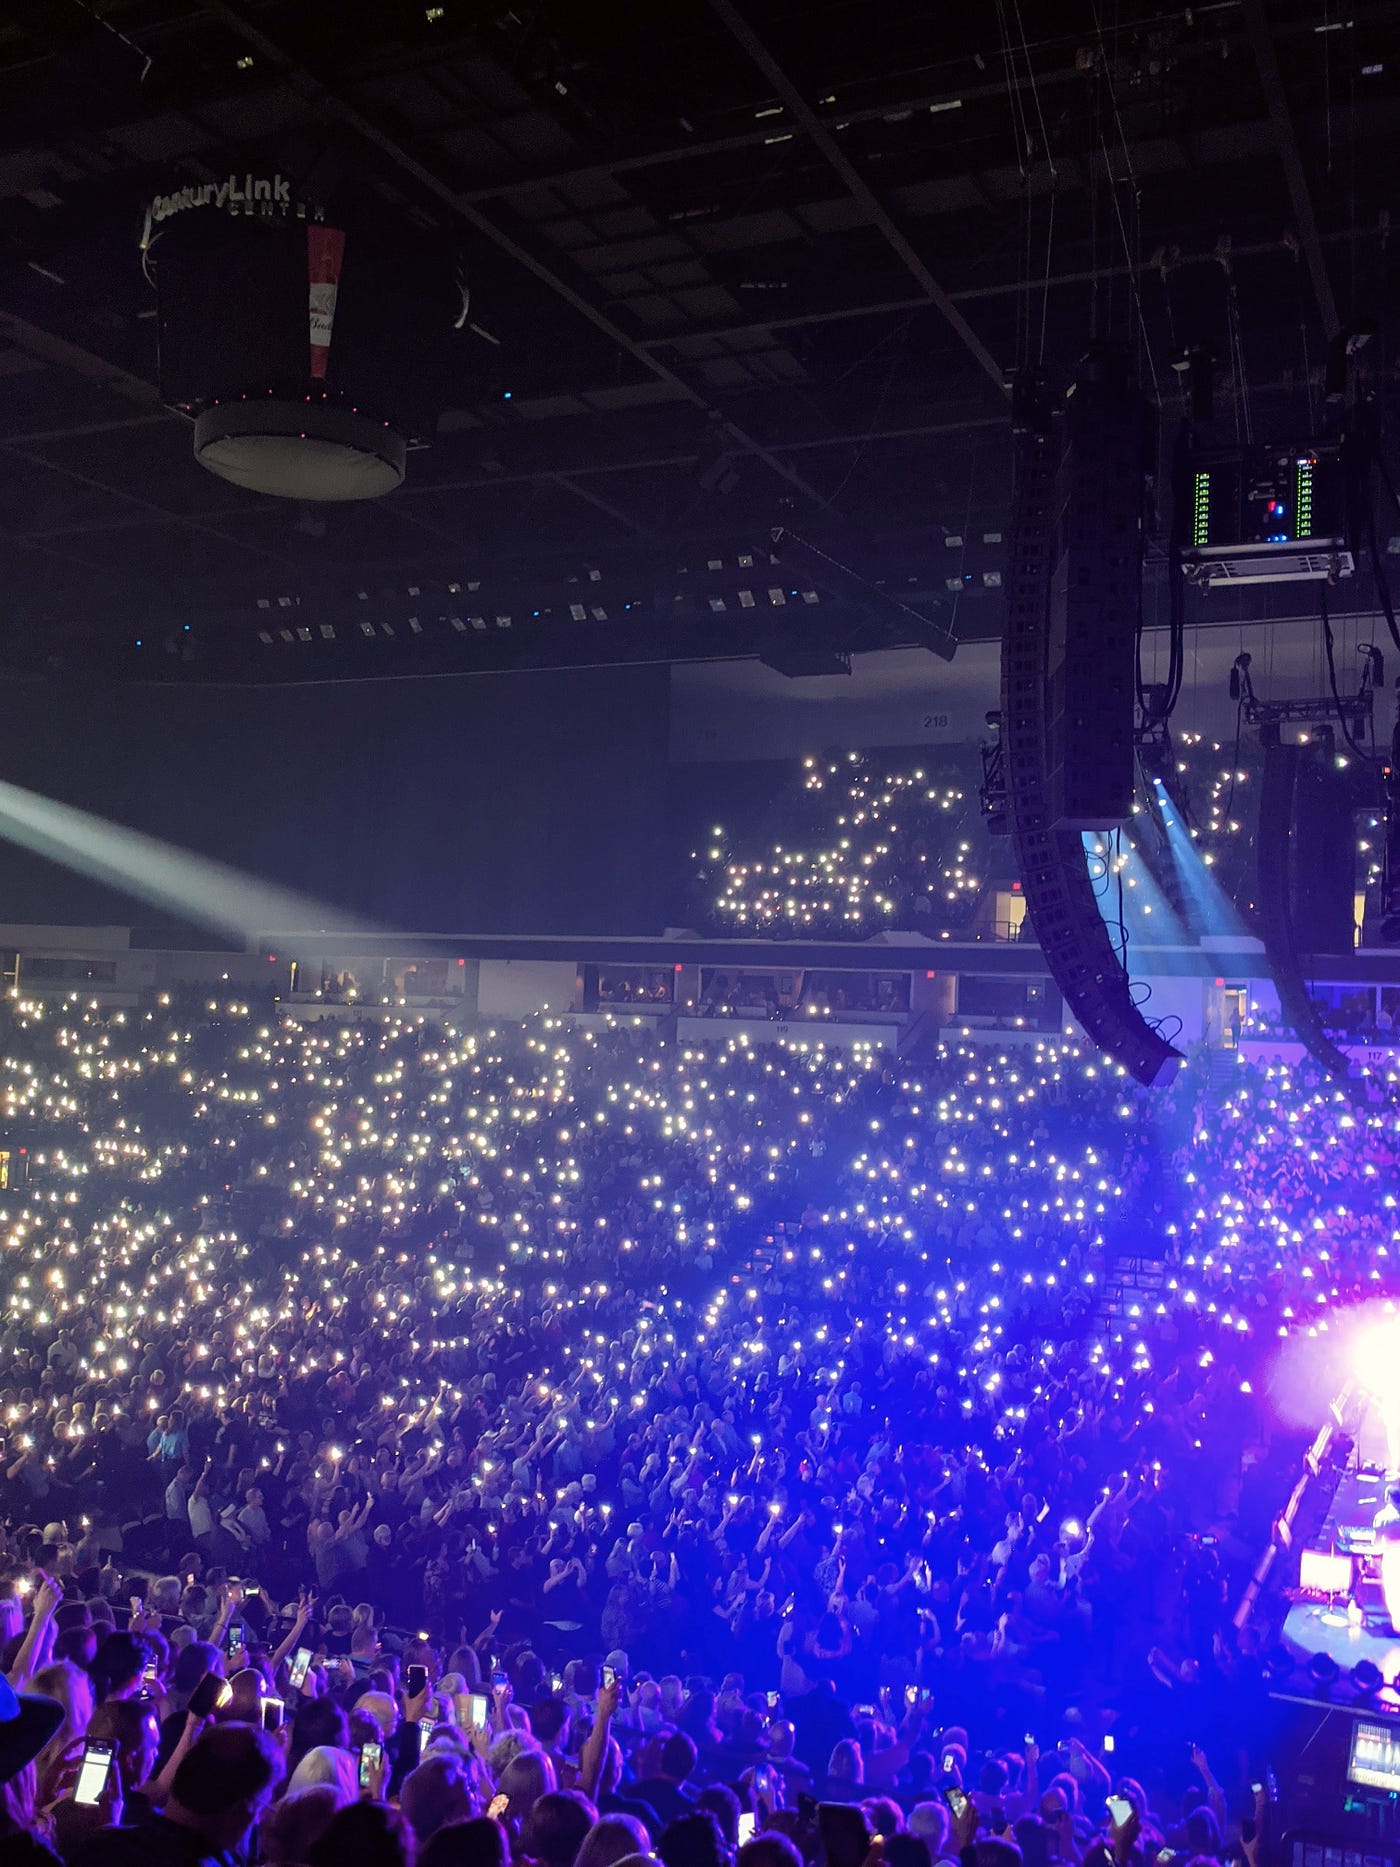 A photo of all our phones lit up as one